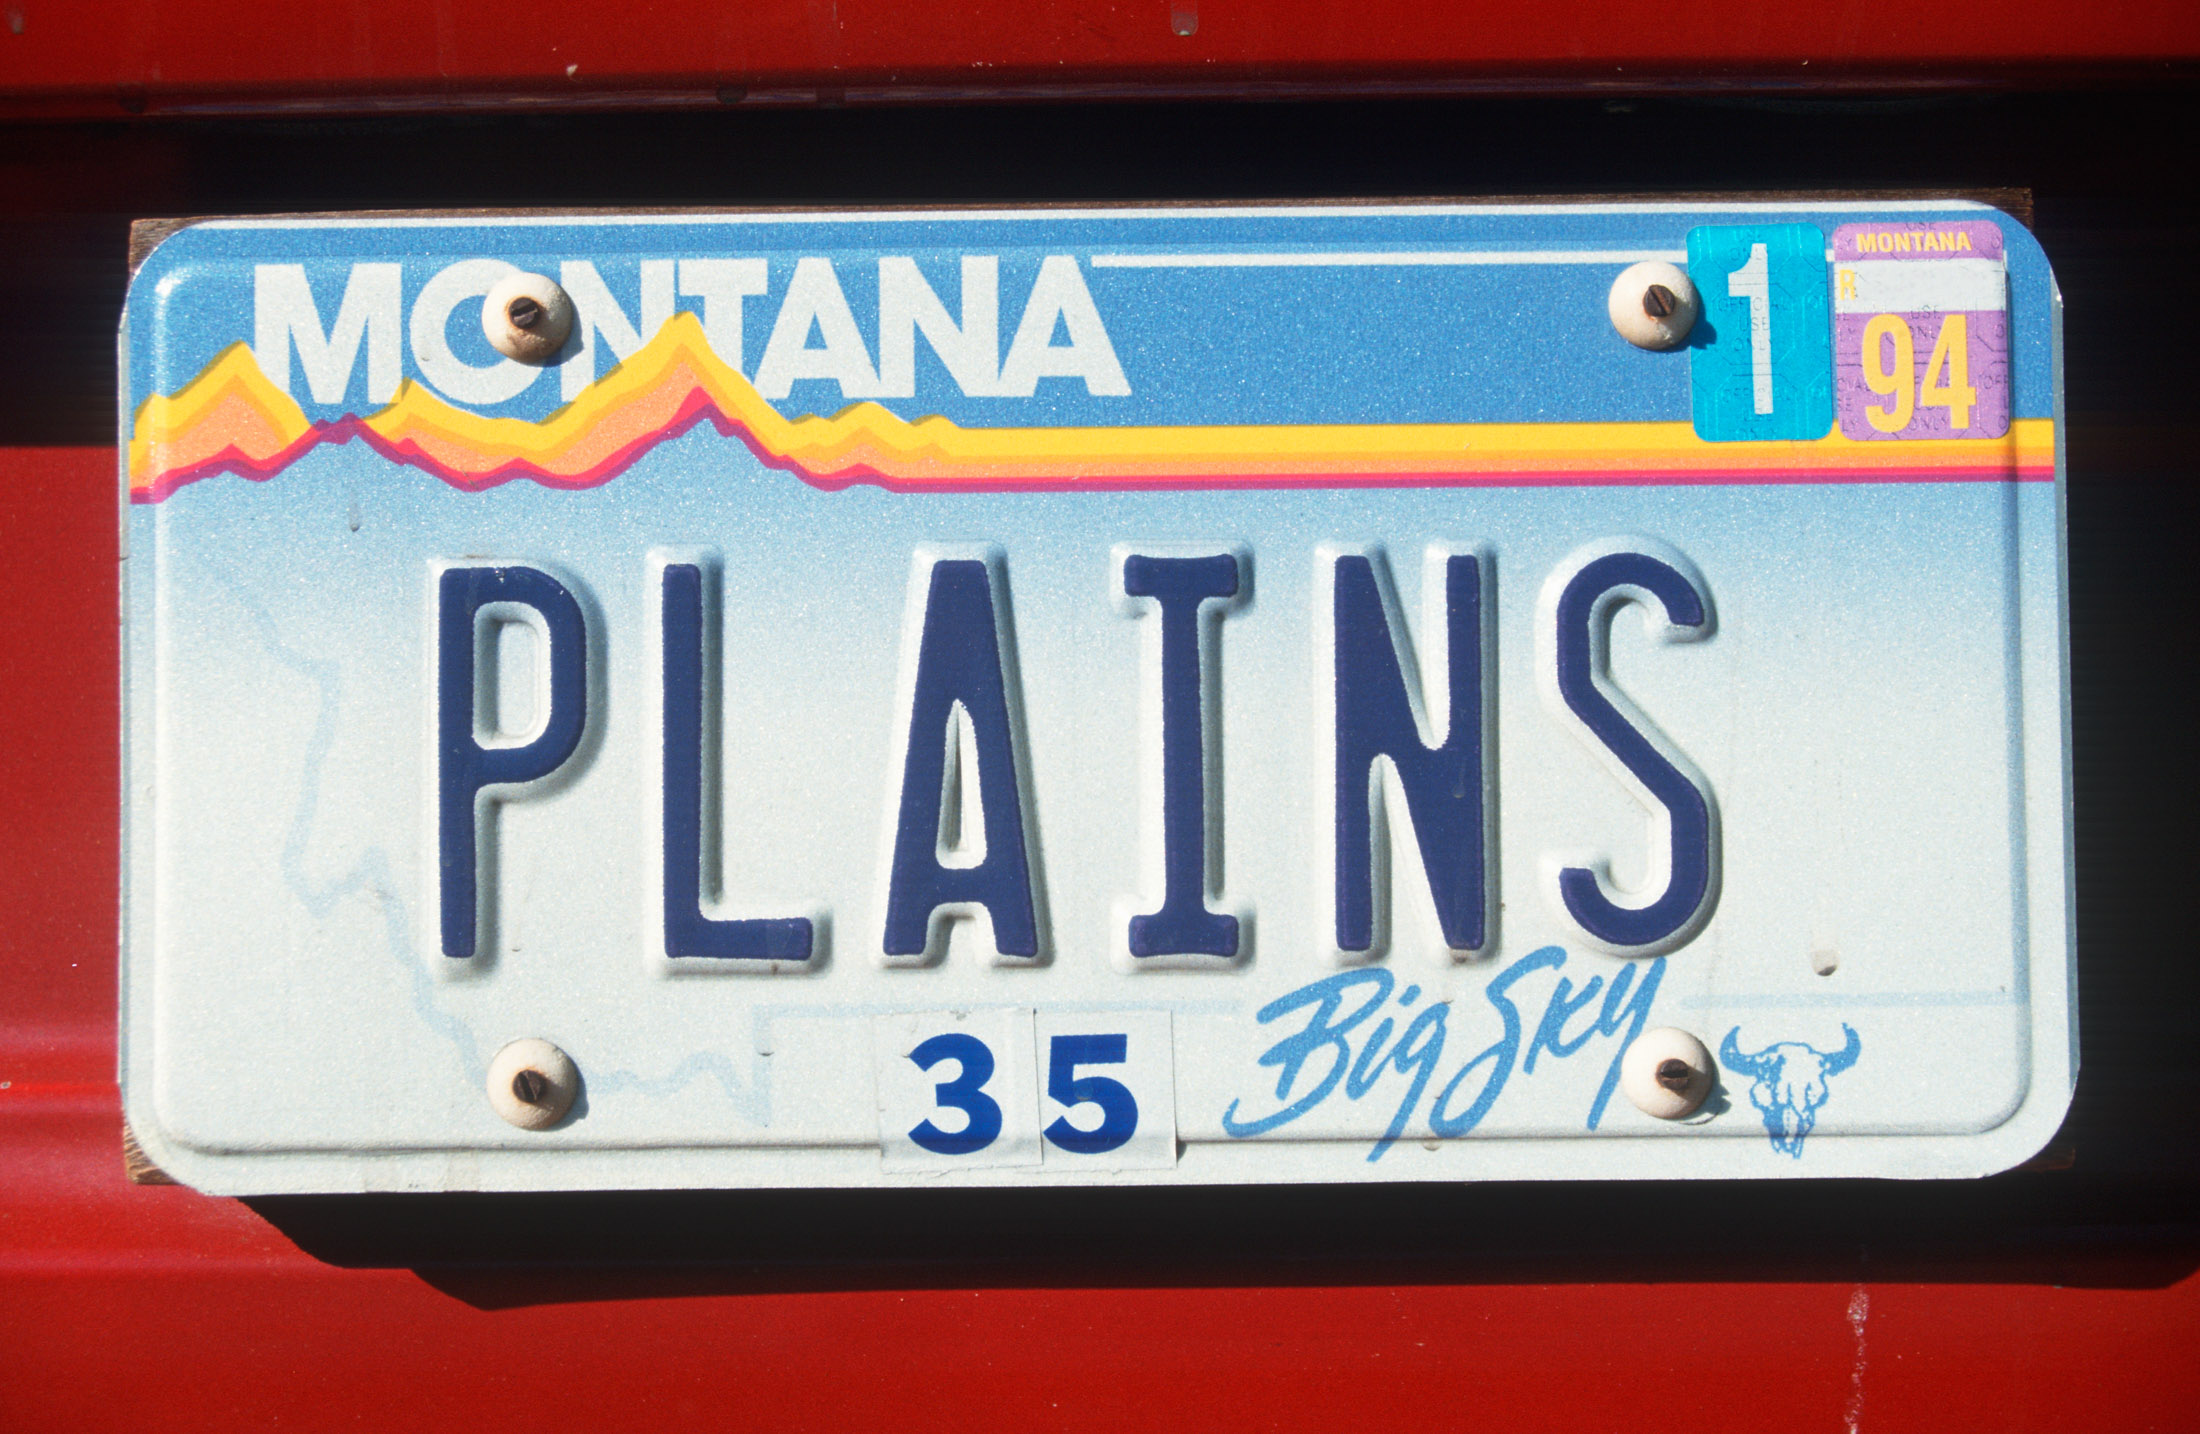 Why Do So Many Supercars Have Montana License Plates? Bloomberg